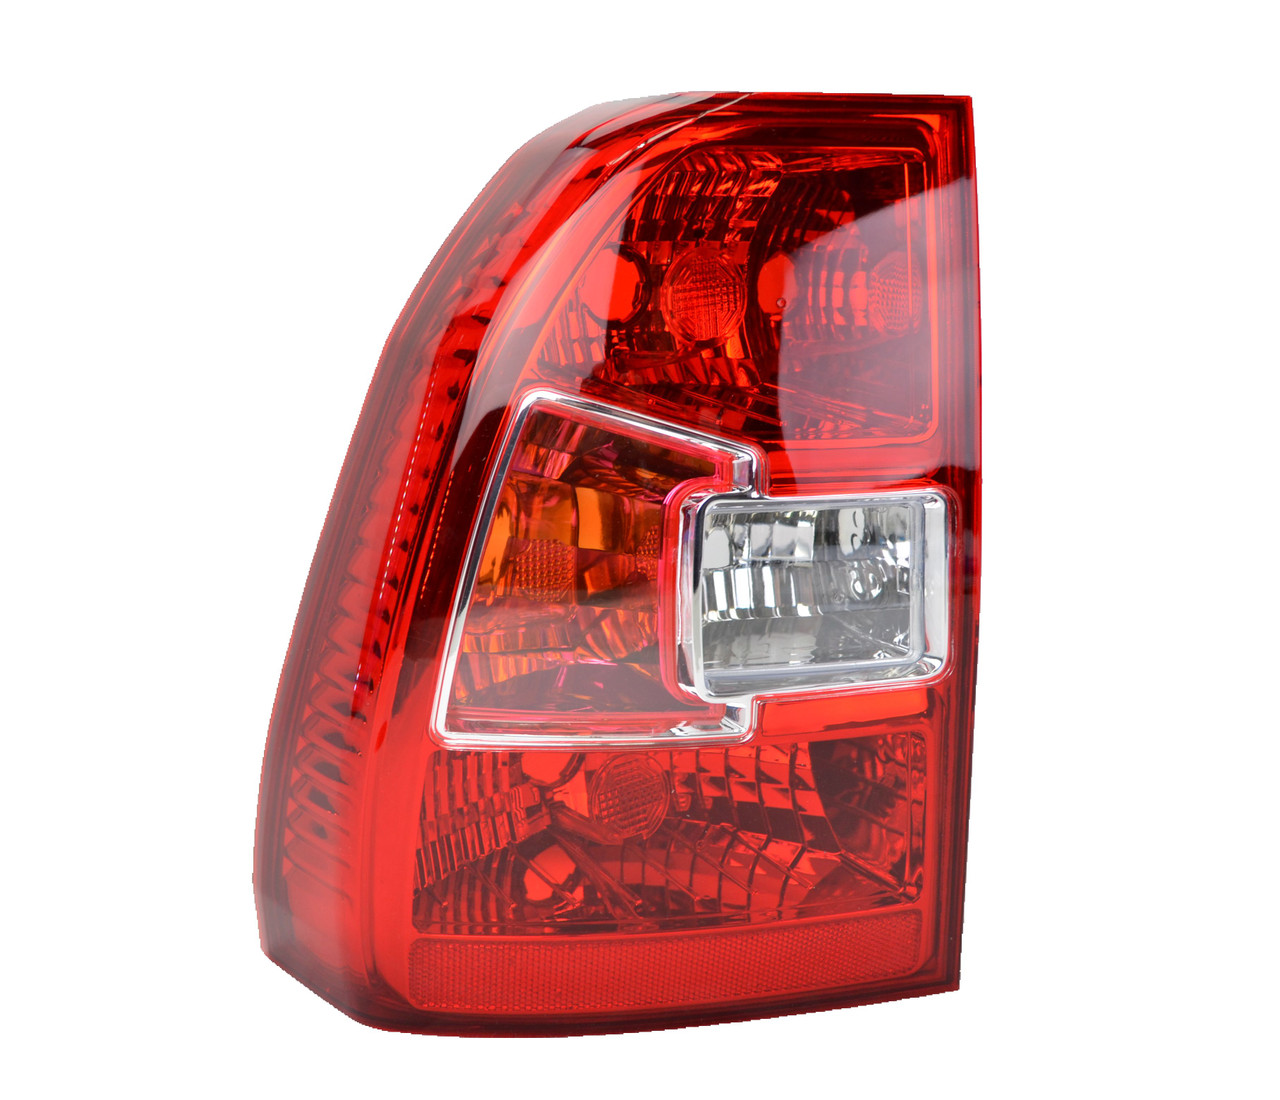 Tail Light for KIA Sportage KM2 10/08-05/10 New Left LHS Rear Lamp SUV 08 09 10